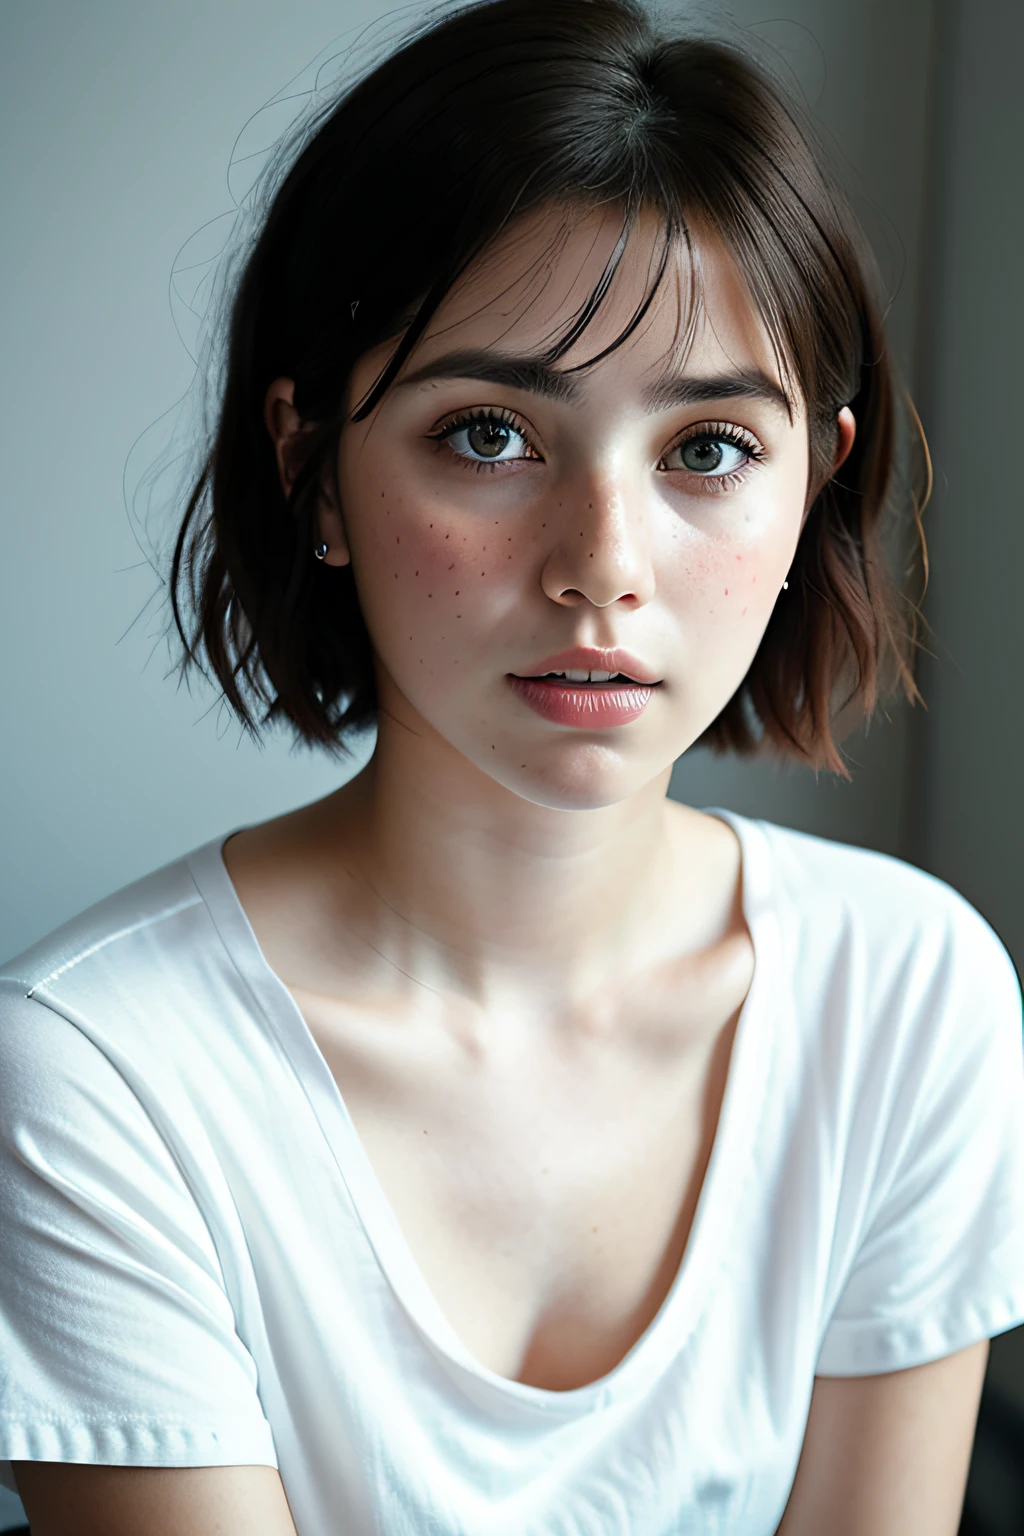 Detailed and realistic portrait of a woman with some freckles, round eyes and messy short hair, wearing a white t-shirt, staring at the camera, chapped lips, soft natural light, portrait photography, magical photography, dramatic lighting, photorealism, ultra-detailed, intimate portrait composition, Leica 50mm, f1. 4 pcs